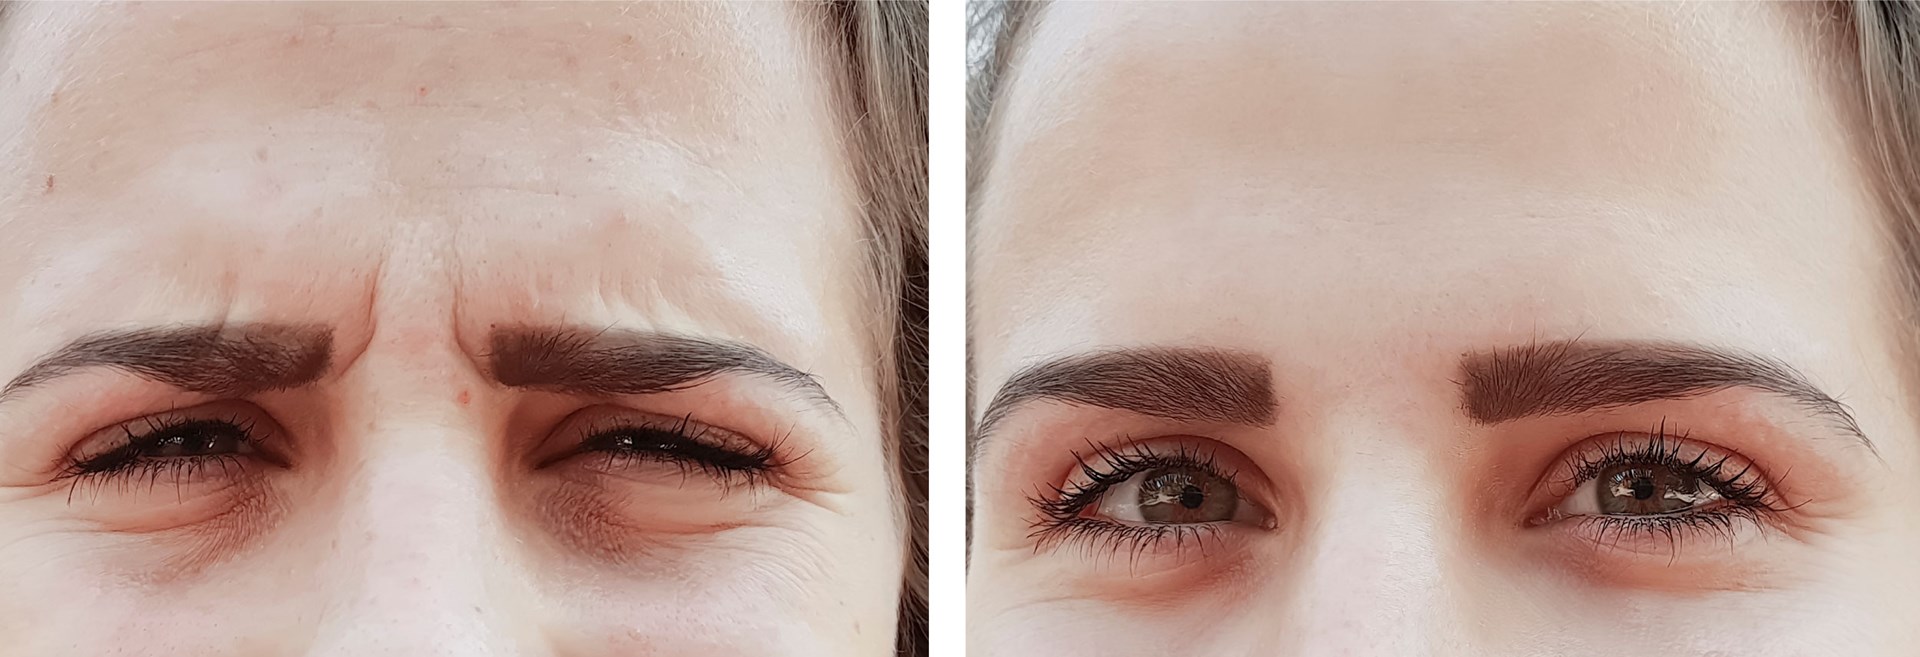 Example of how anti wrinkle treatments can improve the appearance of forehead / brow lines